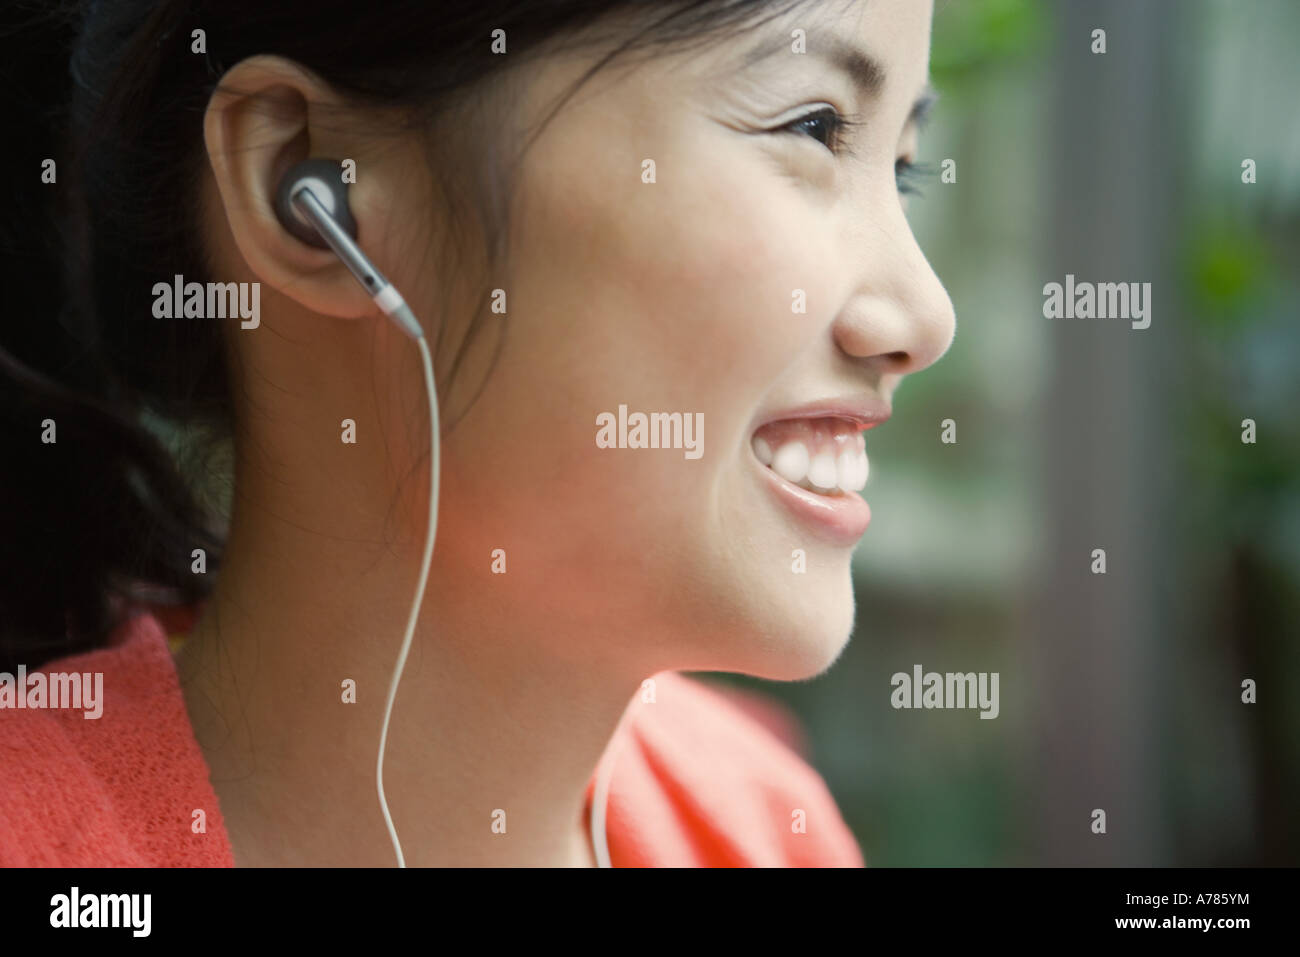 Young woman wearing earphones, smiling, close-up, profile Stock Photo